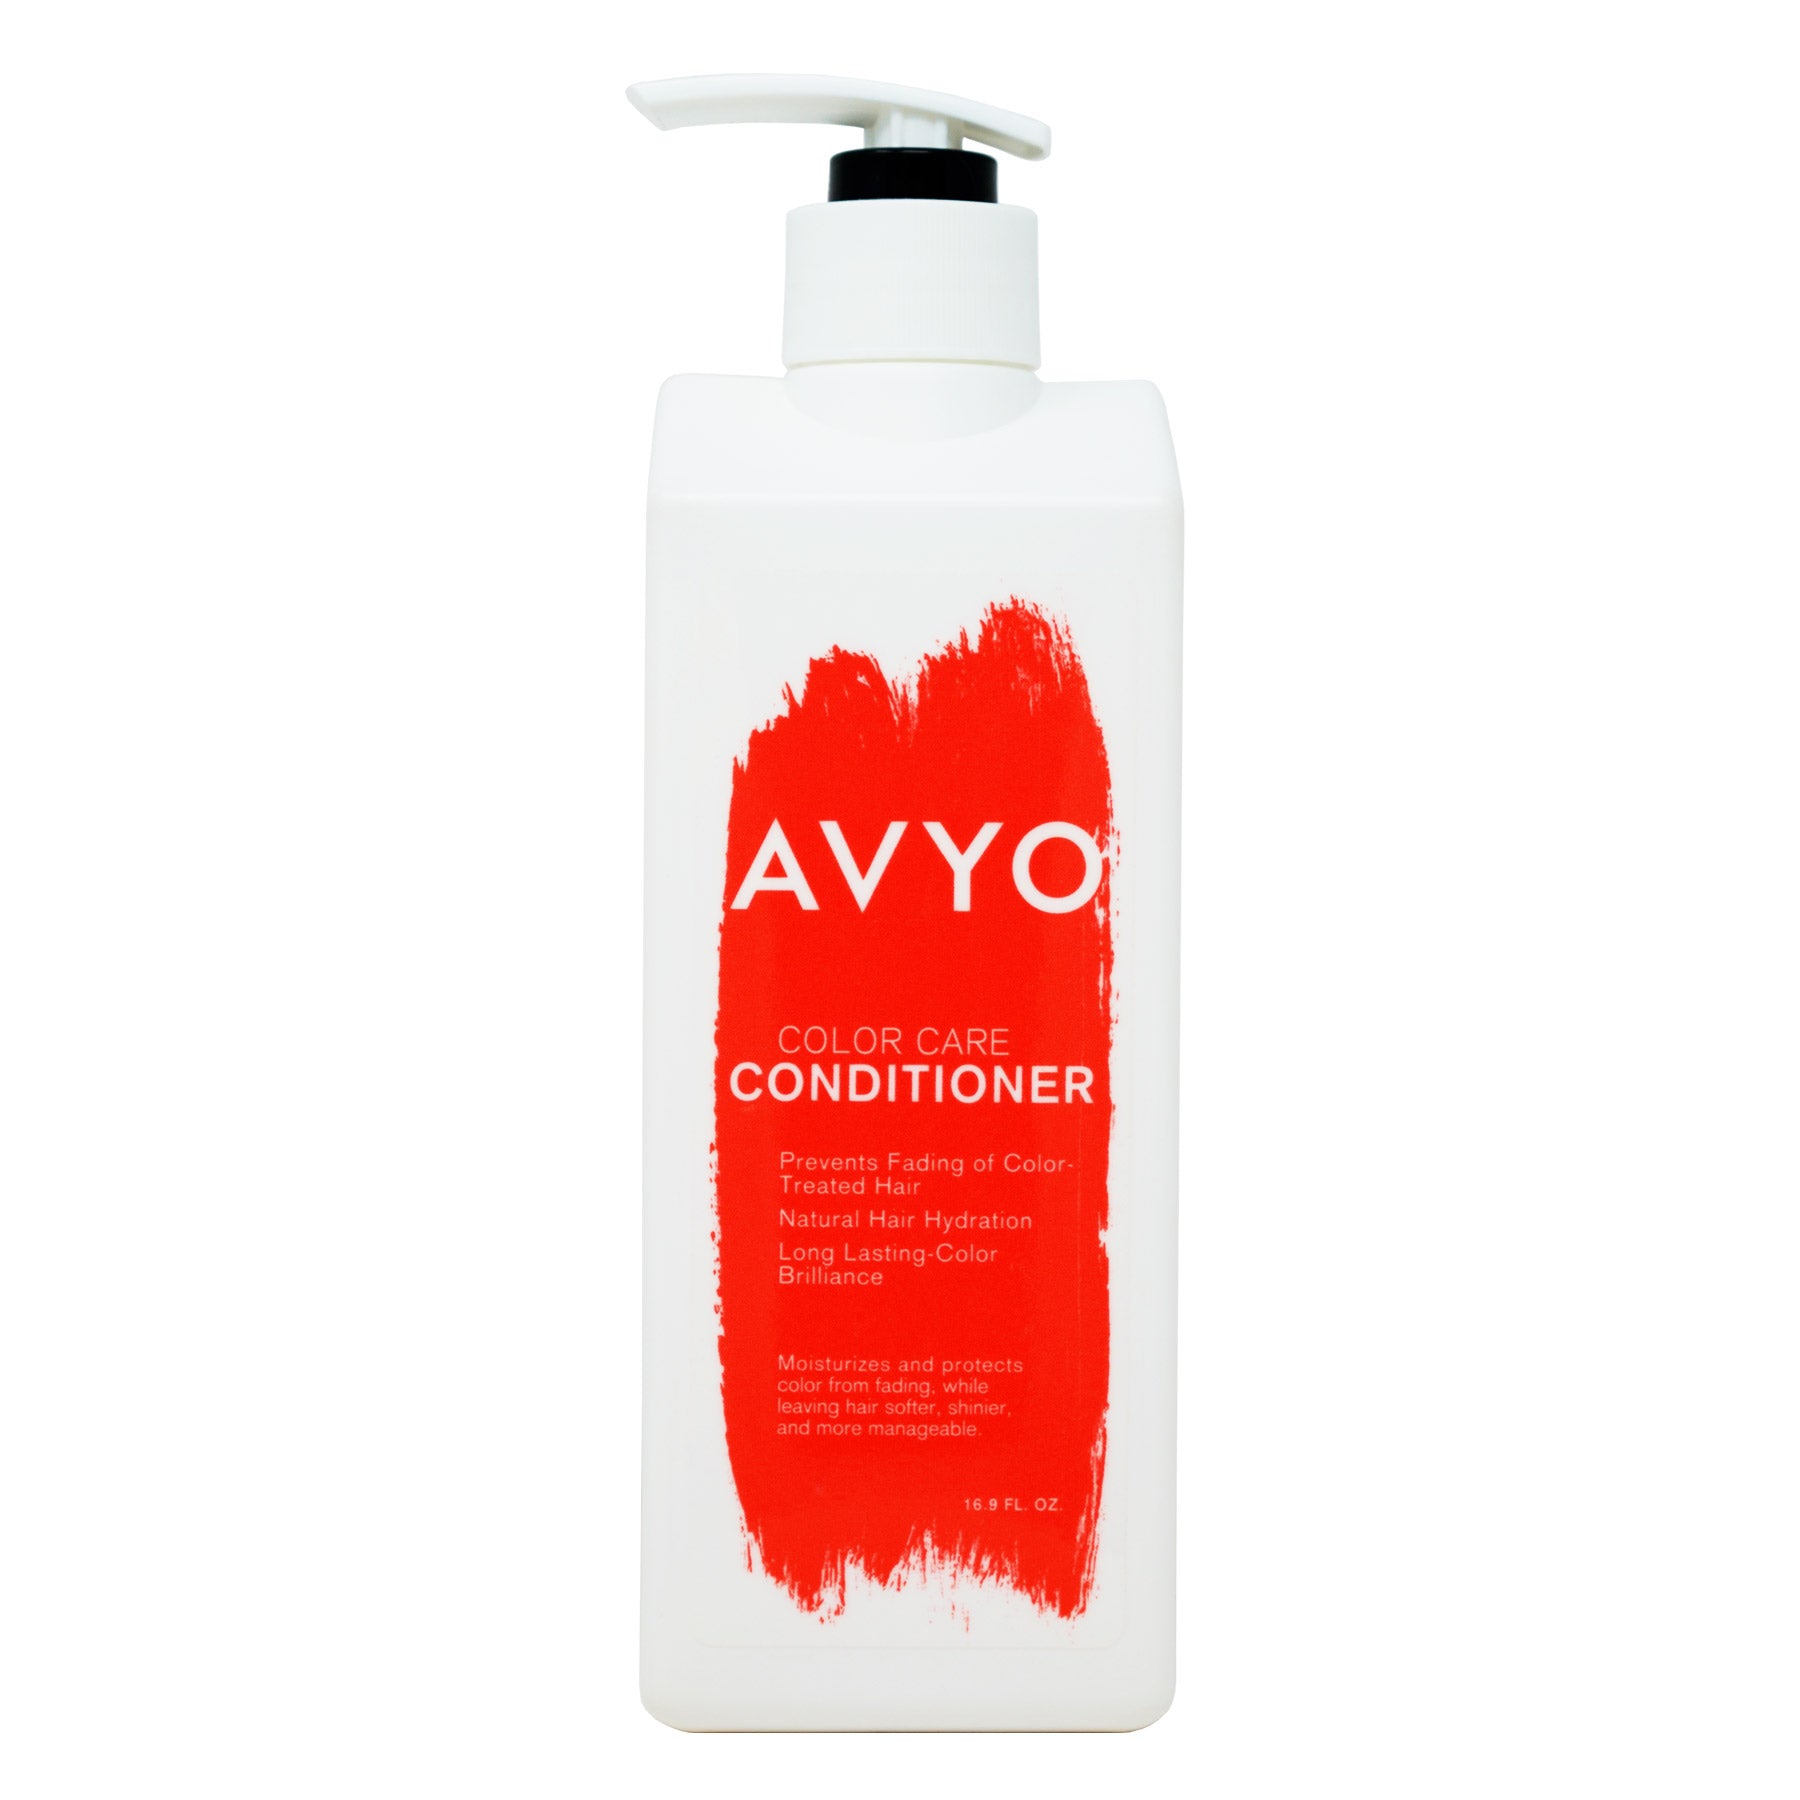 A white pump dispenser bottle of AVYO Color Care Conditioner, prominently featuring the brand's logo in black with a striking red brushstroke in the background. The product label claims to prevent the fading of color-treated hair, ensures natural hair hydration, and promotes long-lasting color brilliance. It highlights the benefits of moisturizing and protecting hair, leaving it softer, shinier, and more manageable. The bottle contains 16.9 fluid ounces of the conditioner.